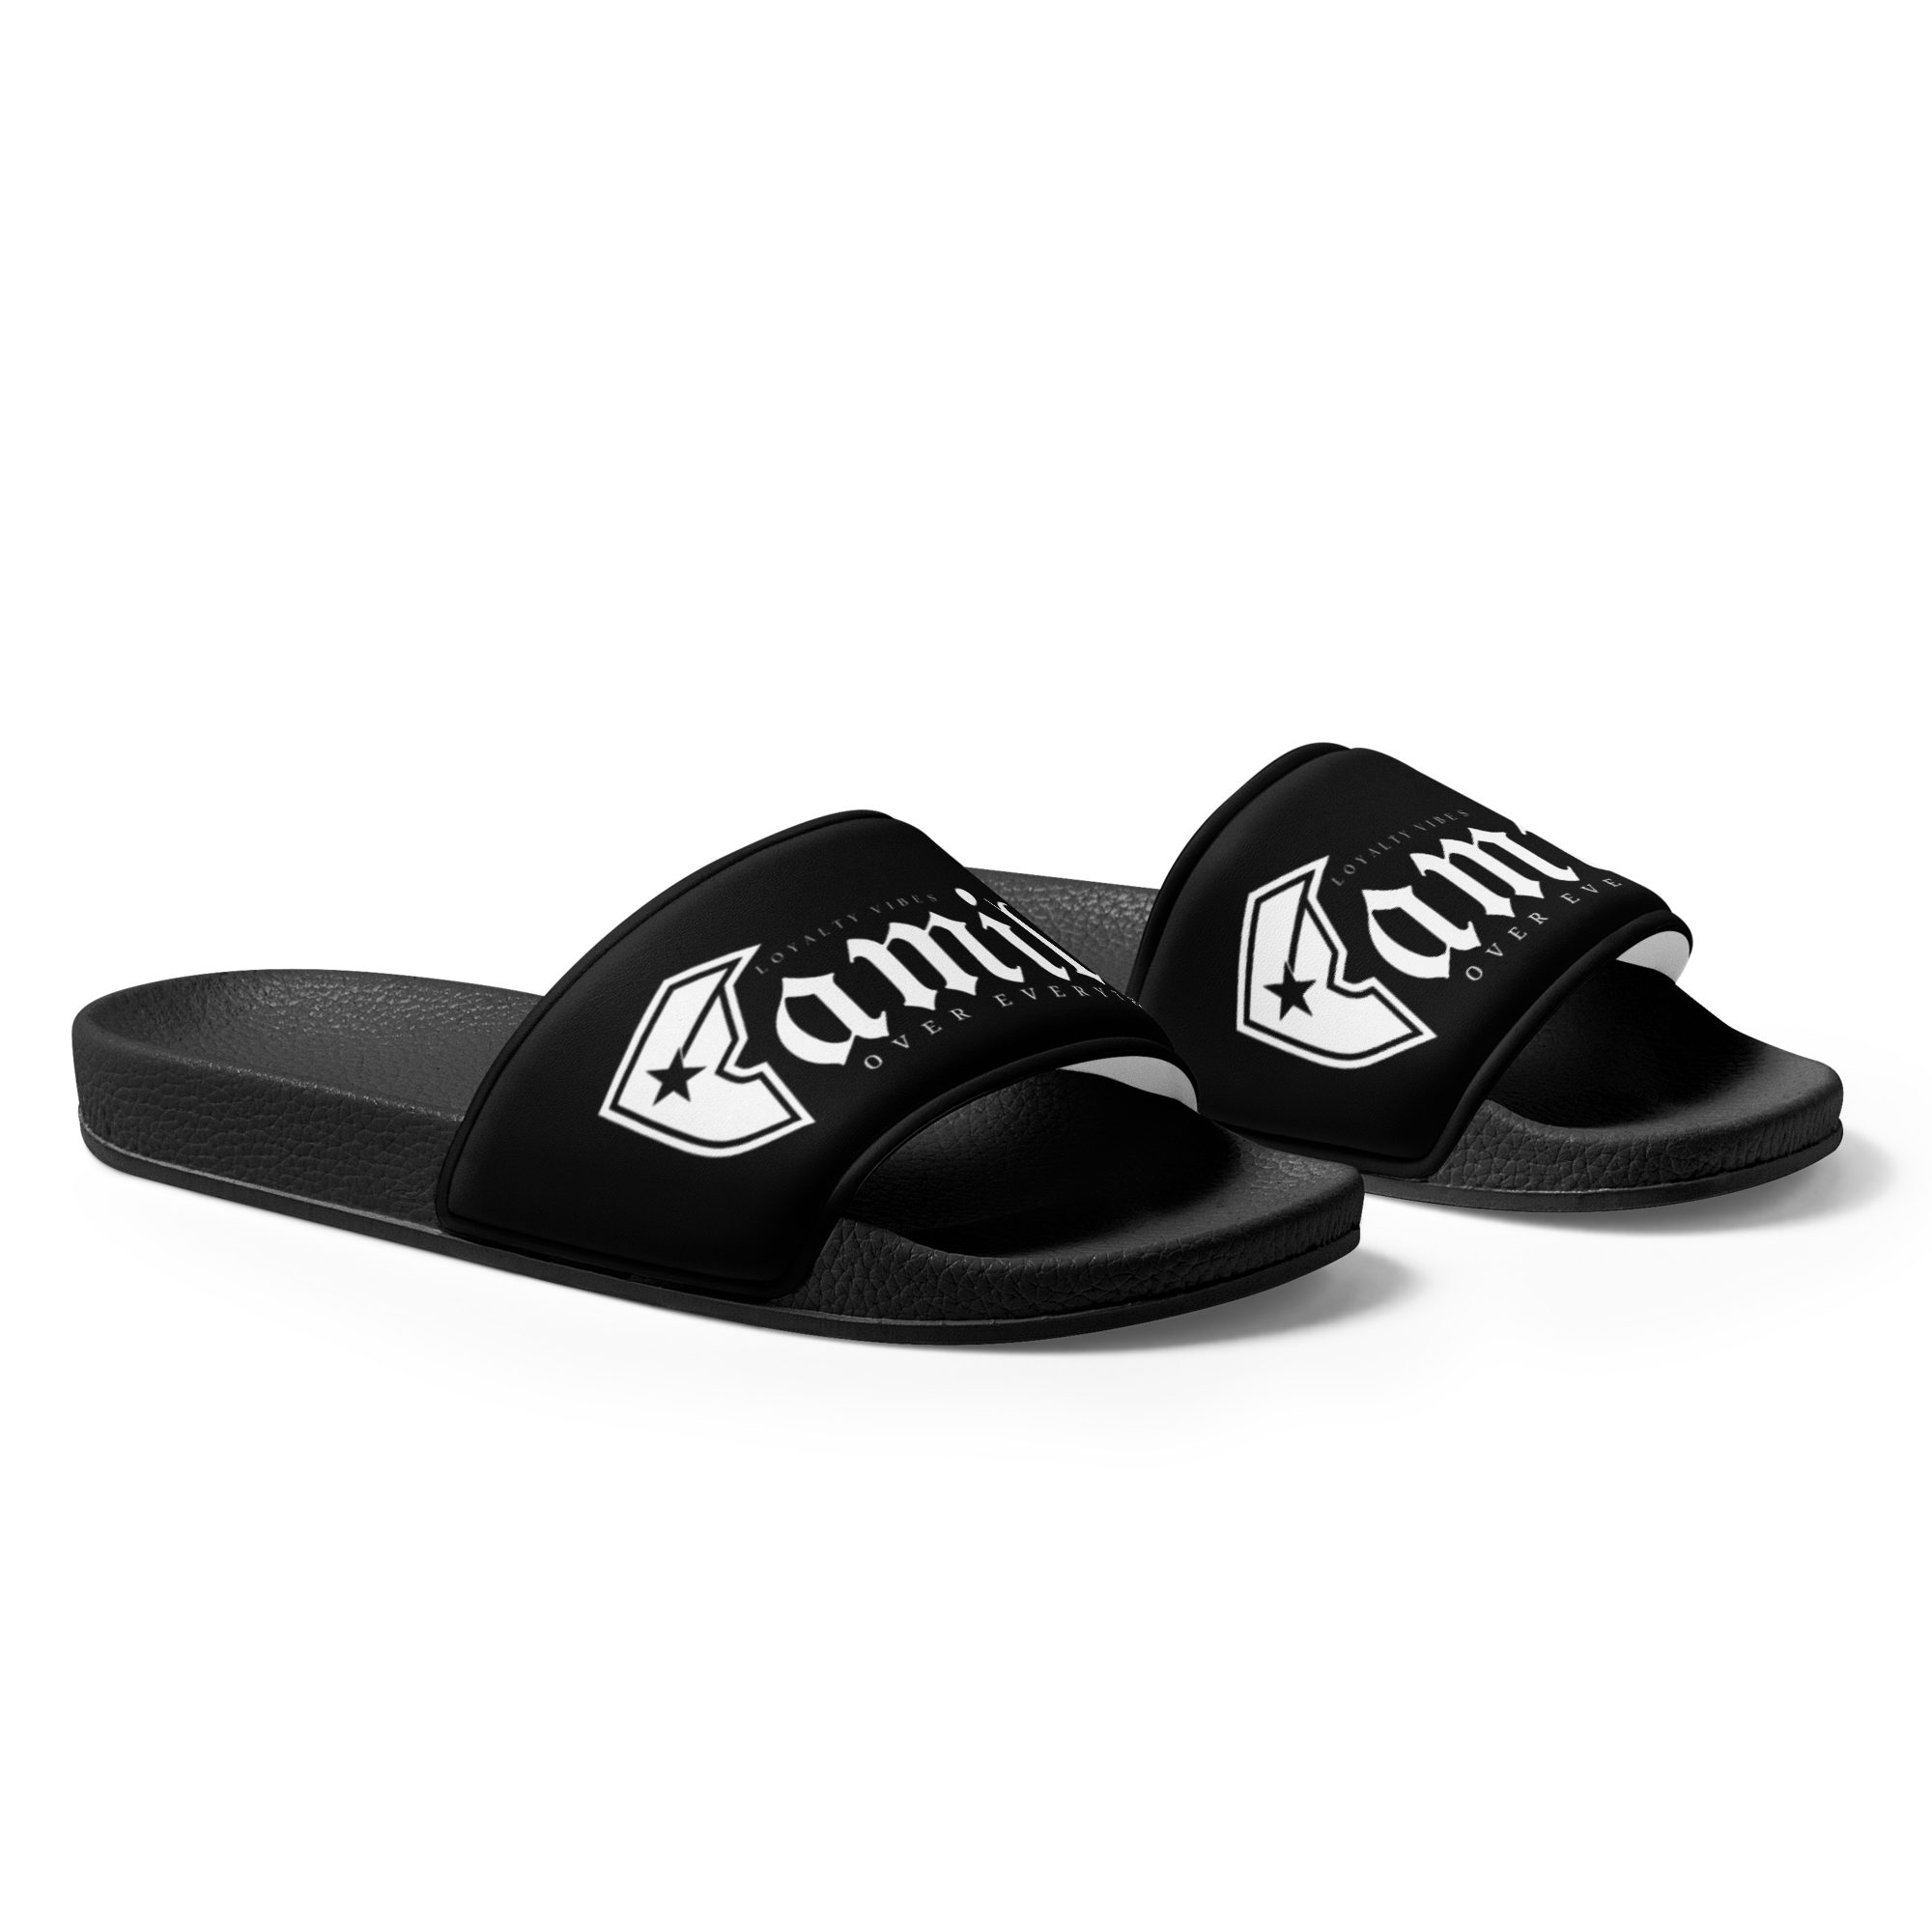 Familia Over Everything Sandals Black Men's - Loyalty Vibes